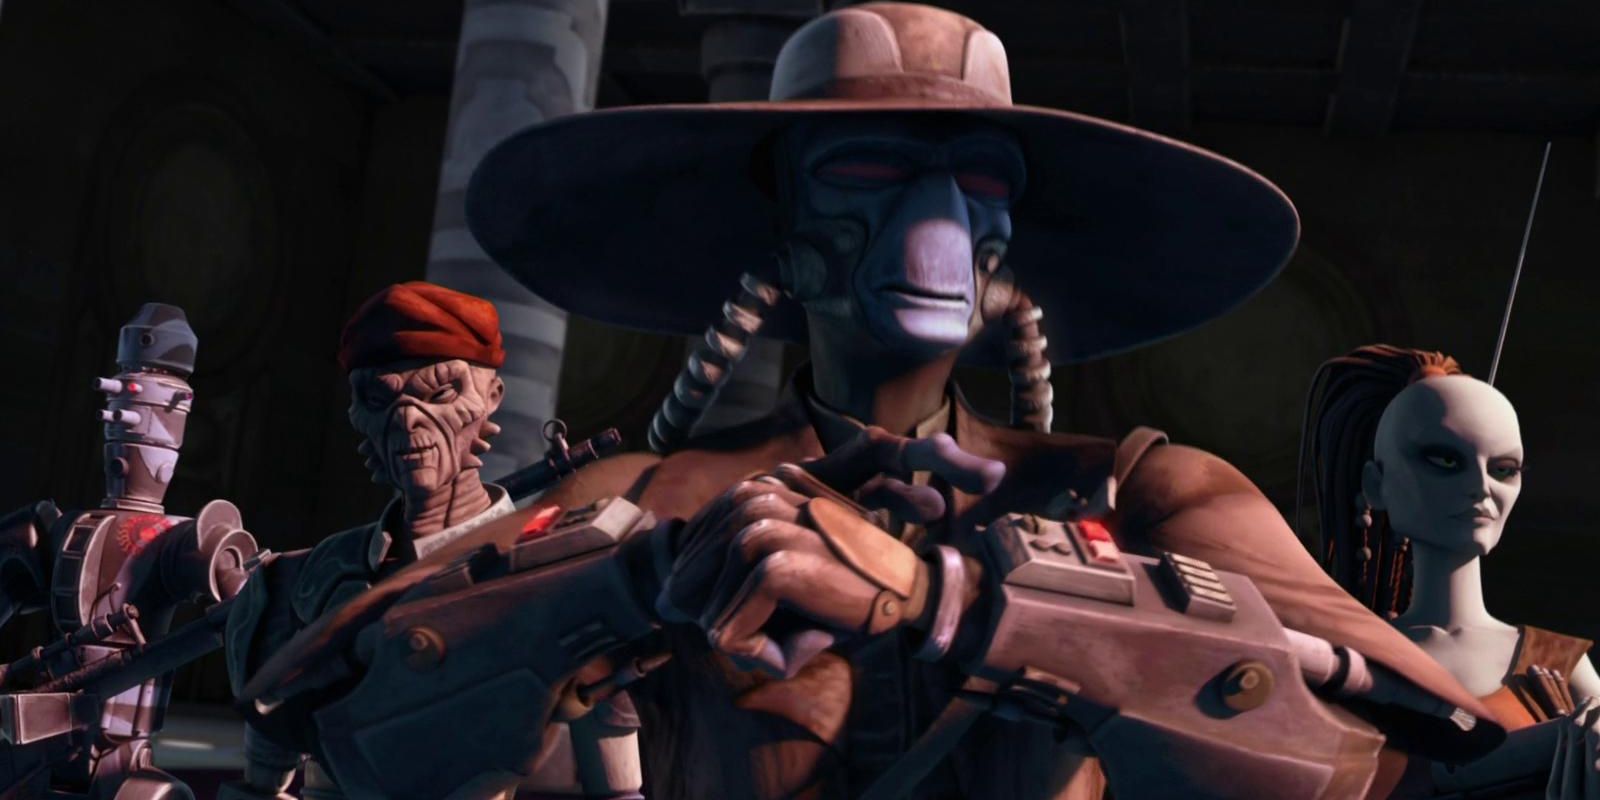 00. The Clone Wars Cad Bane leads a team of bounty hunters, including Aurra Sing, a Weequay pirate, and IG-88 (Hostage Crisis)